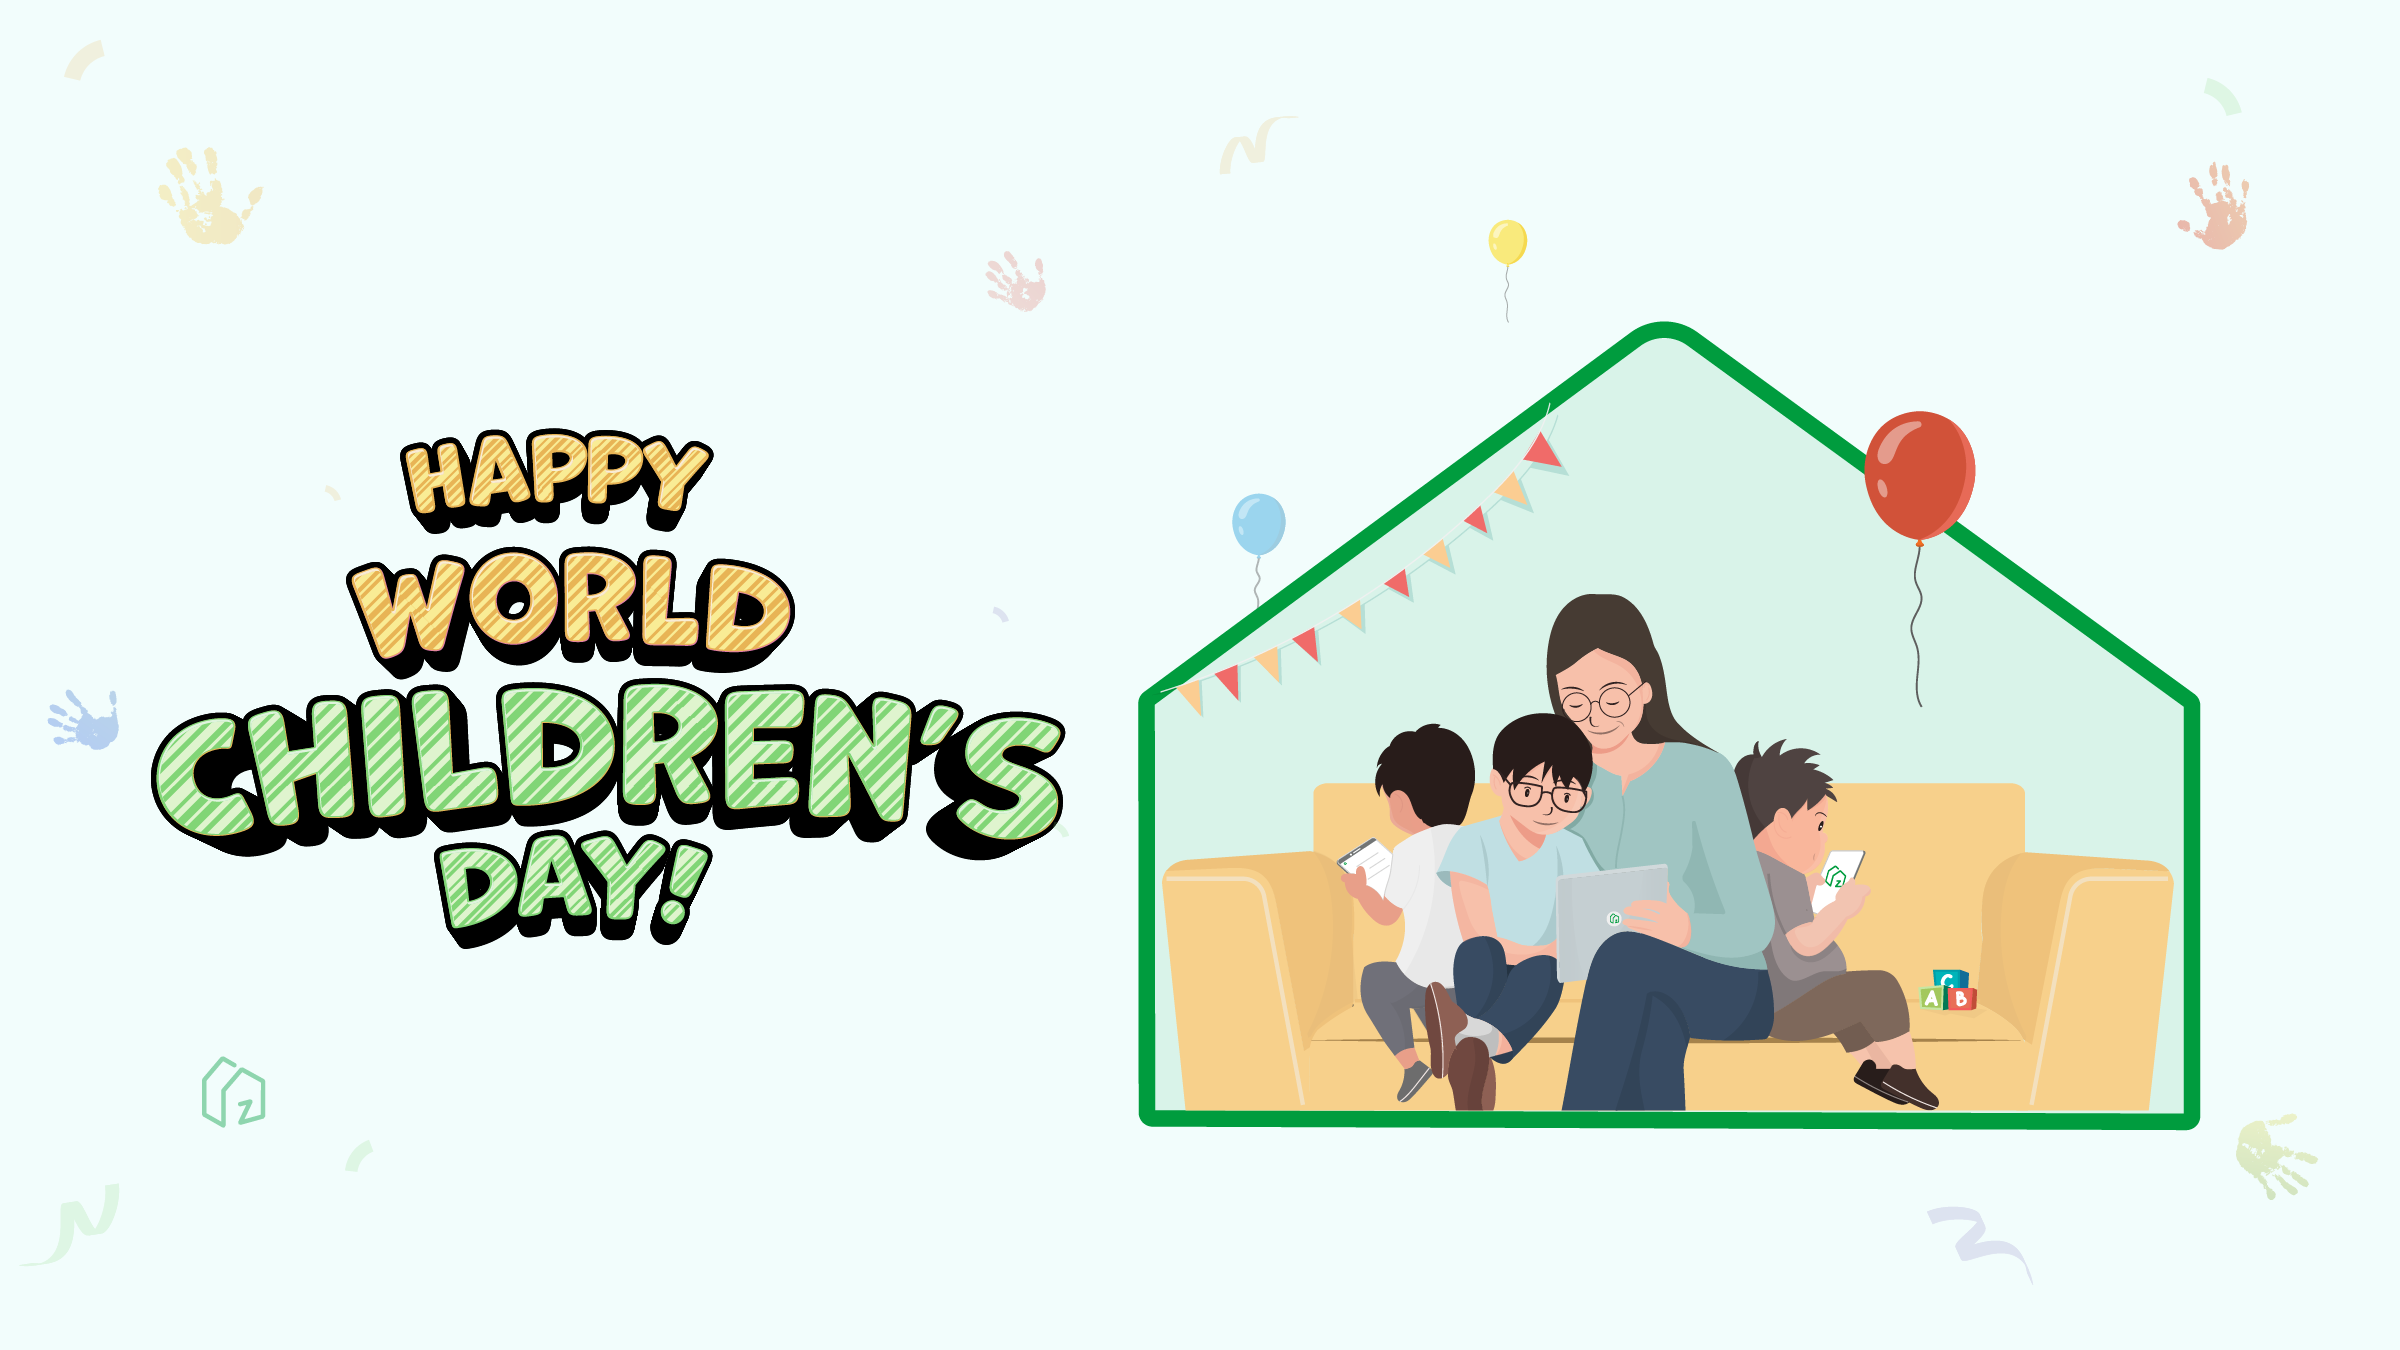 This Children’s Day, make kids a part of your digital home.